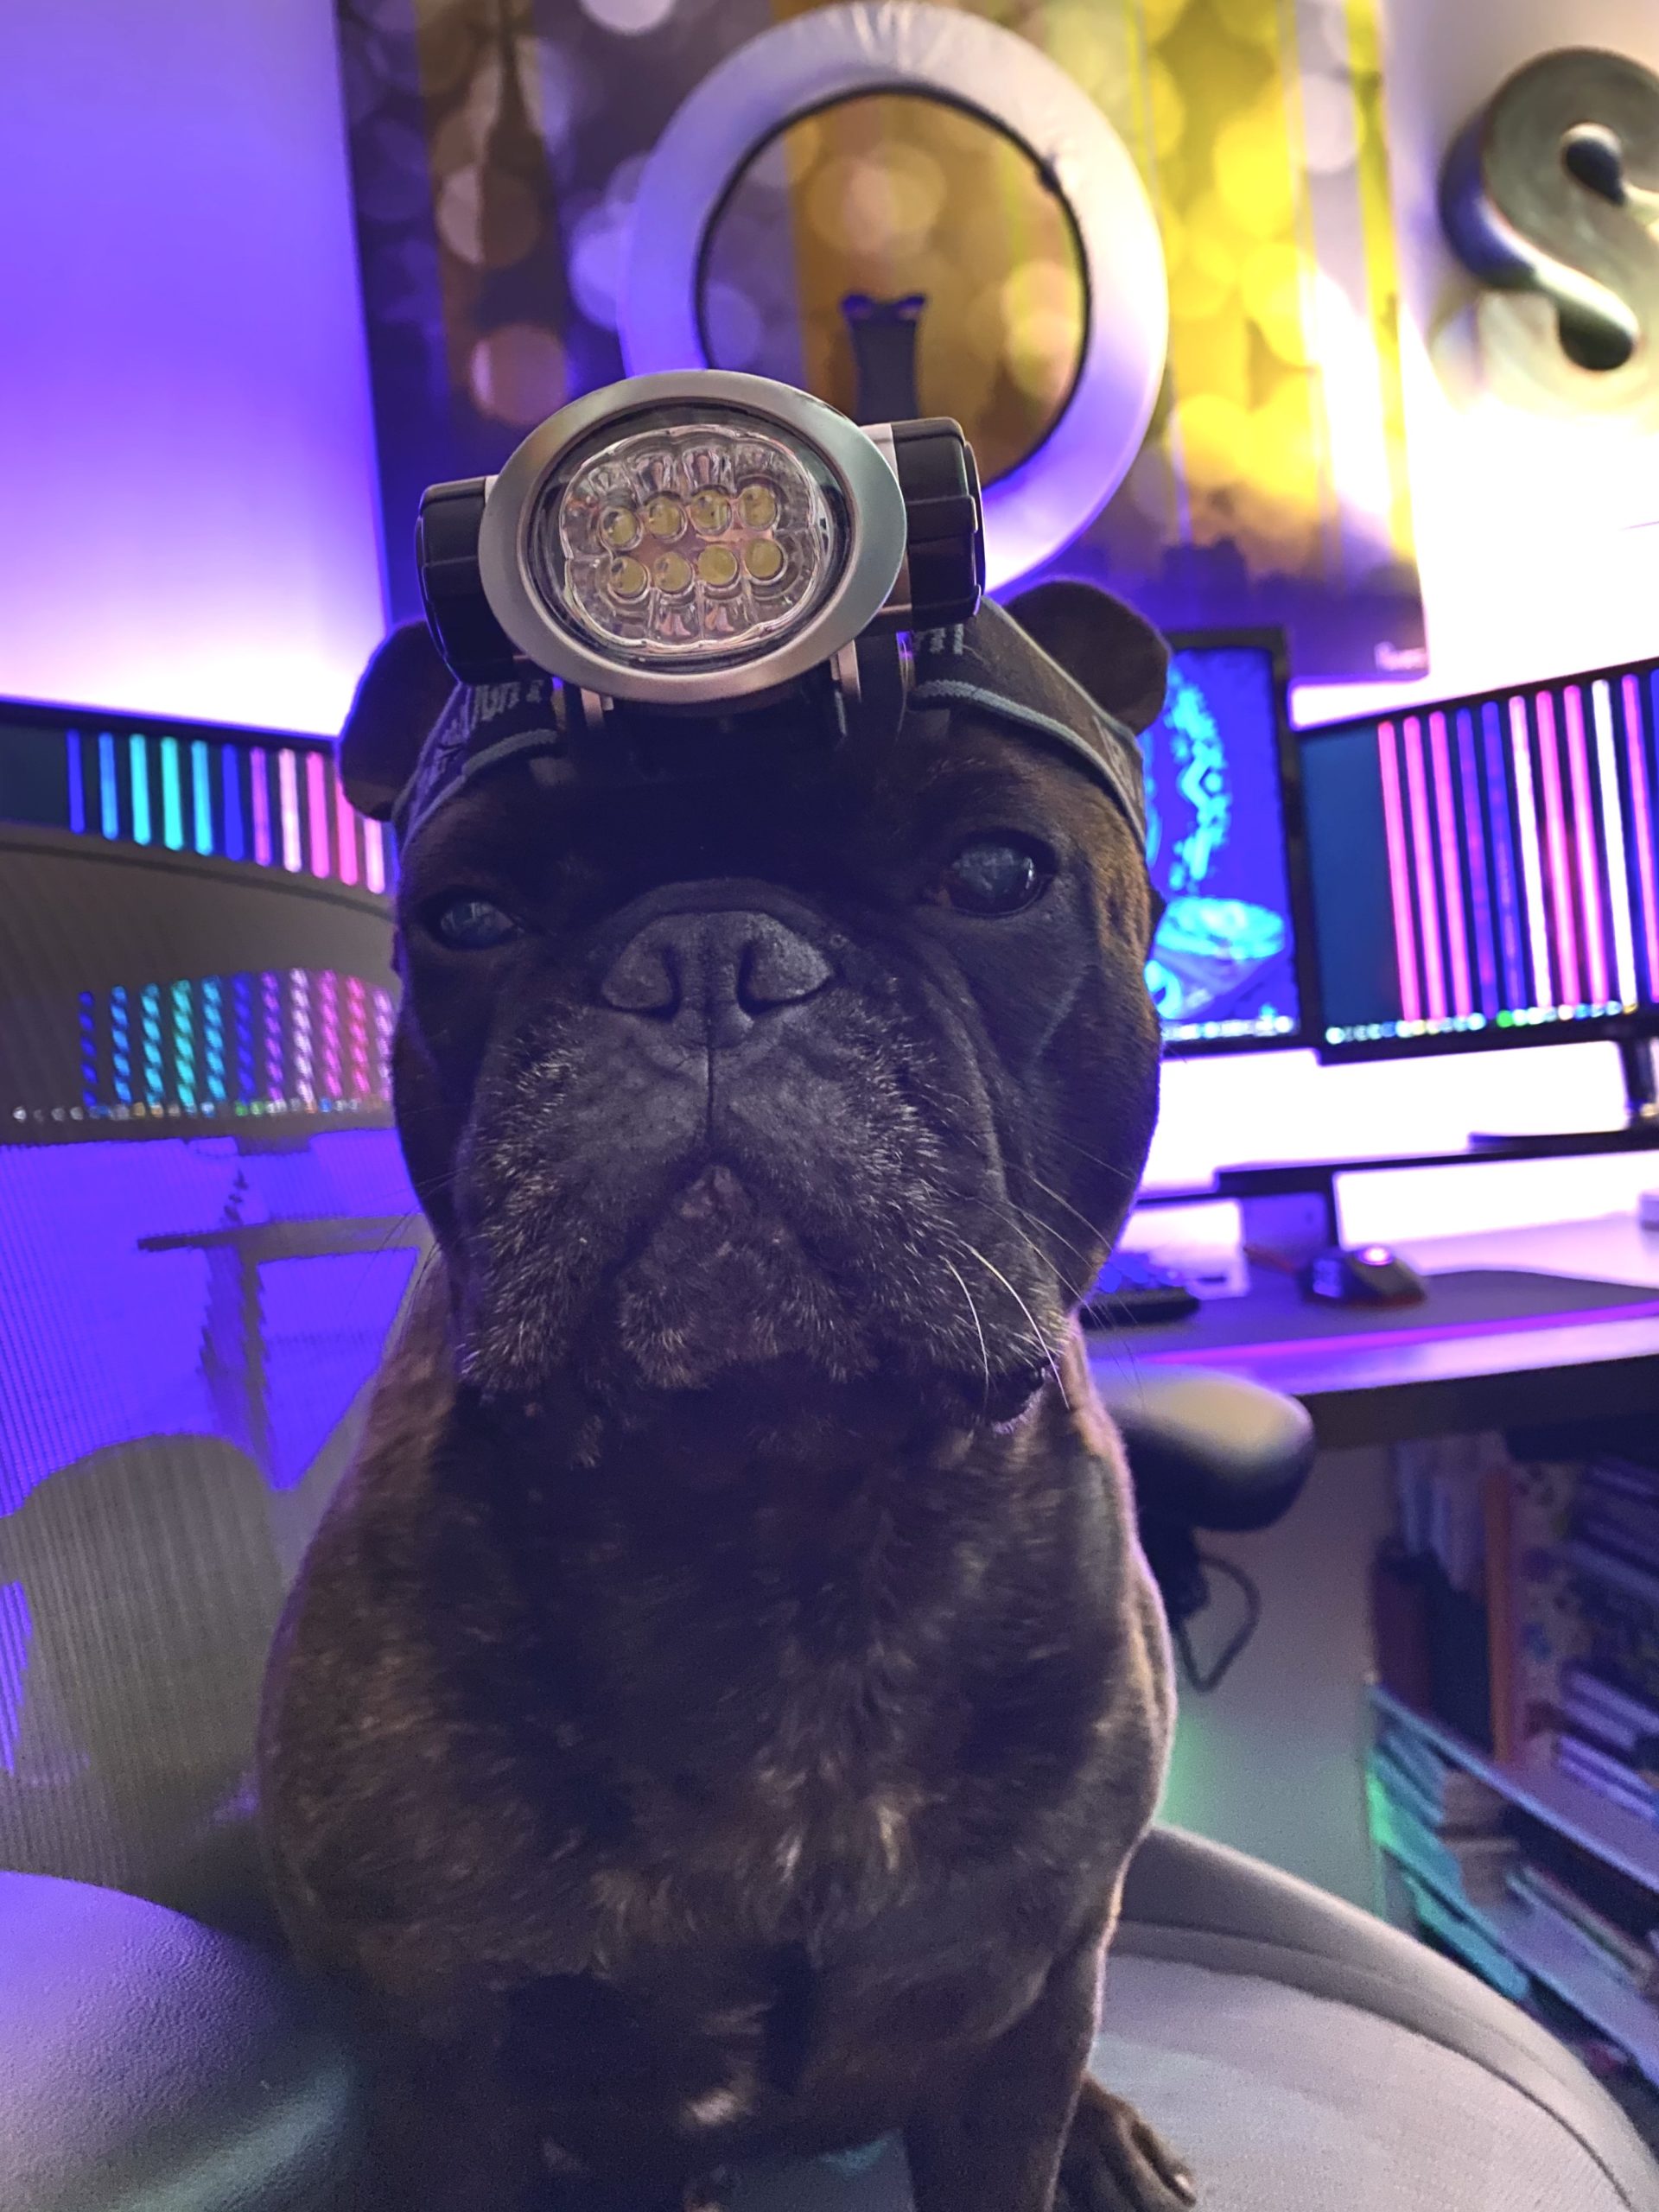 The author's pup, Remy, modelling a headlamp. (Photo: Sarah Jacobsson Purewal)